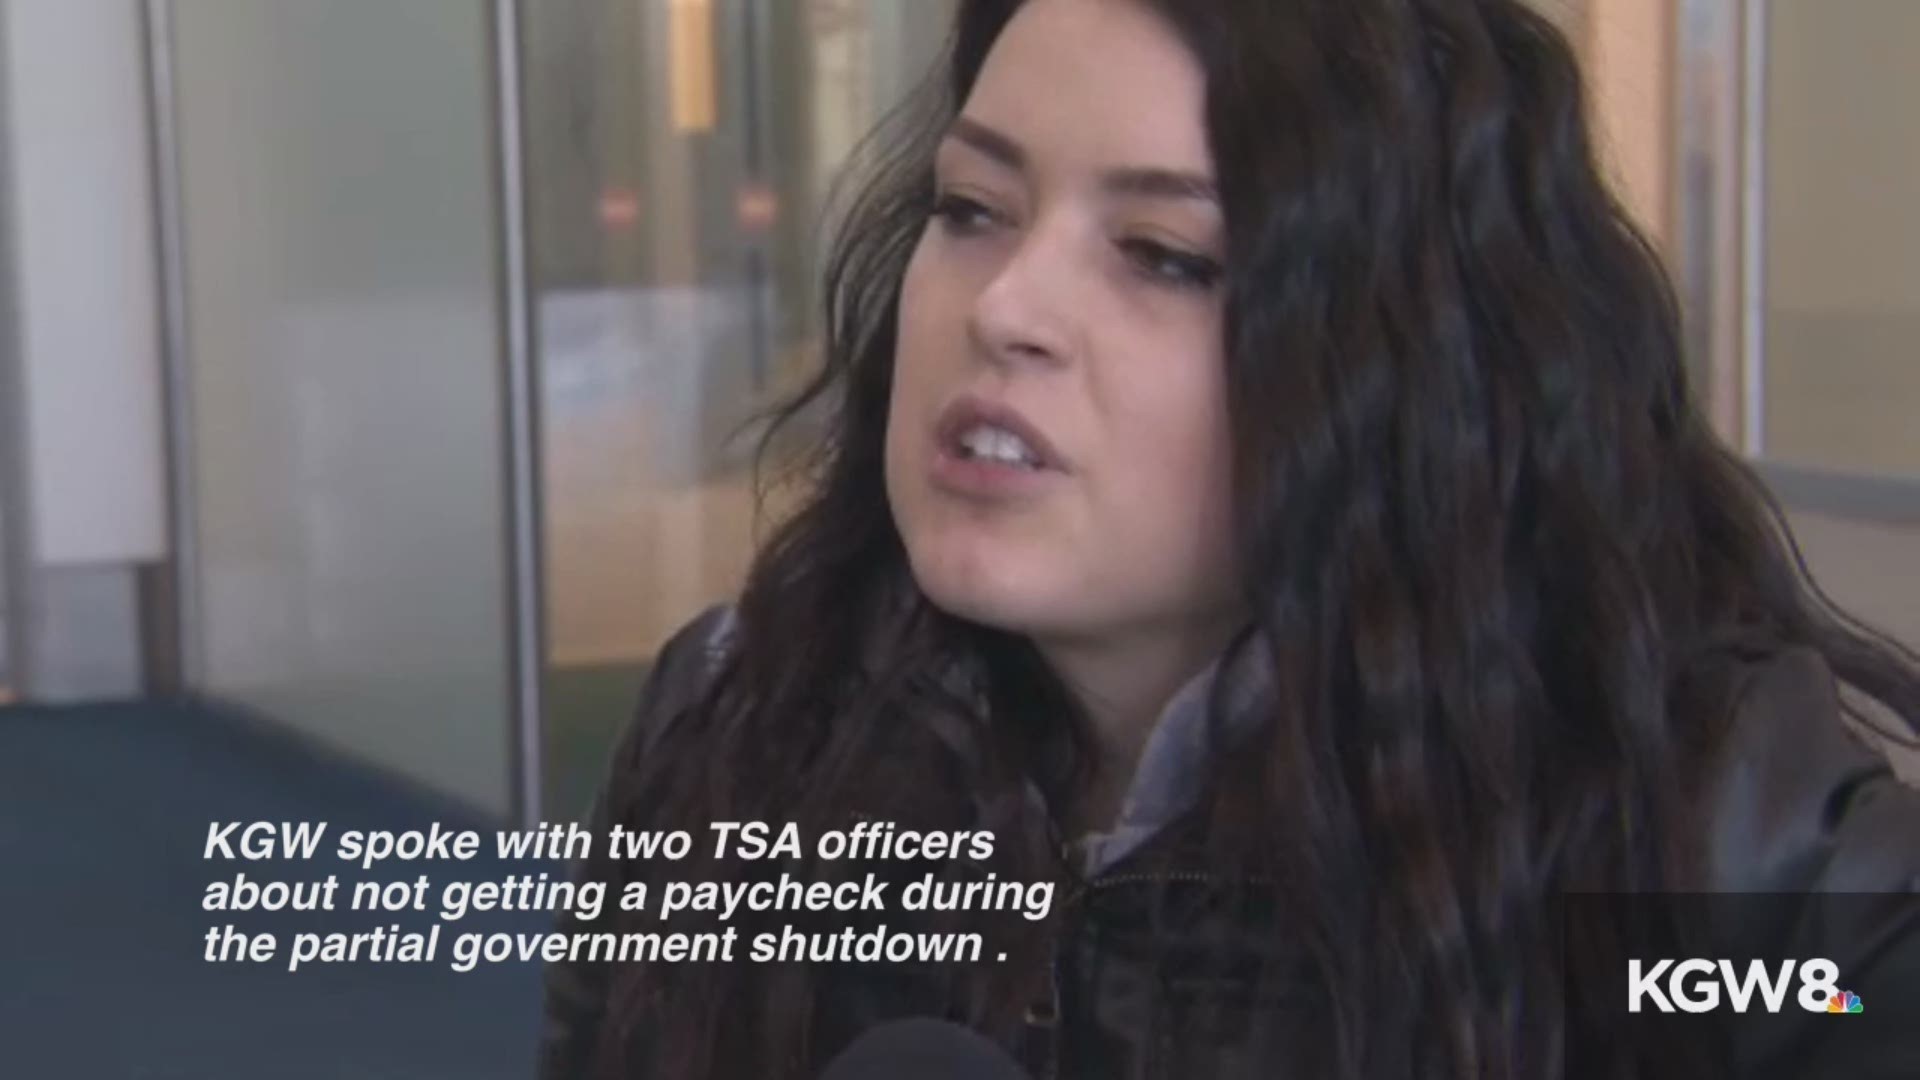 We spoke with two TSA officers, Lindsay McCuin and Anthony Jones, about the partial government shutdown.